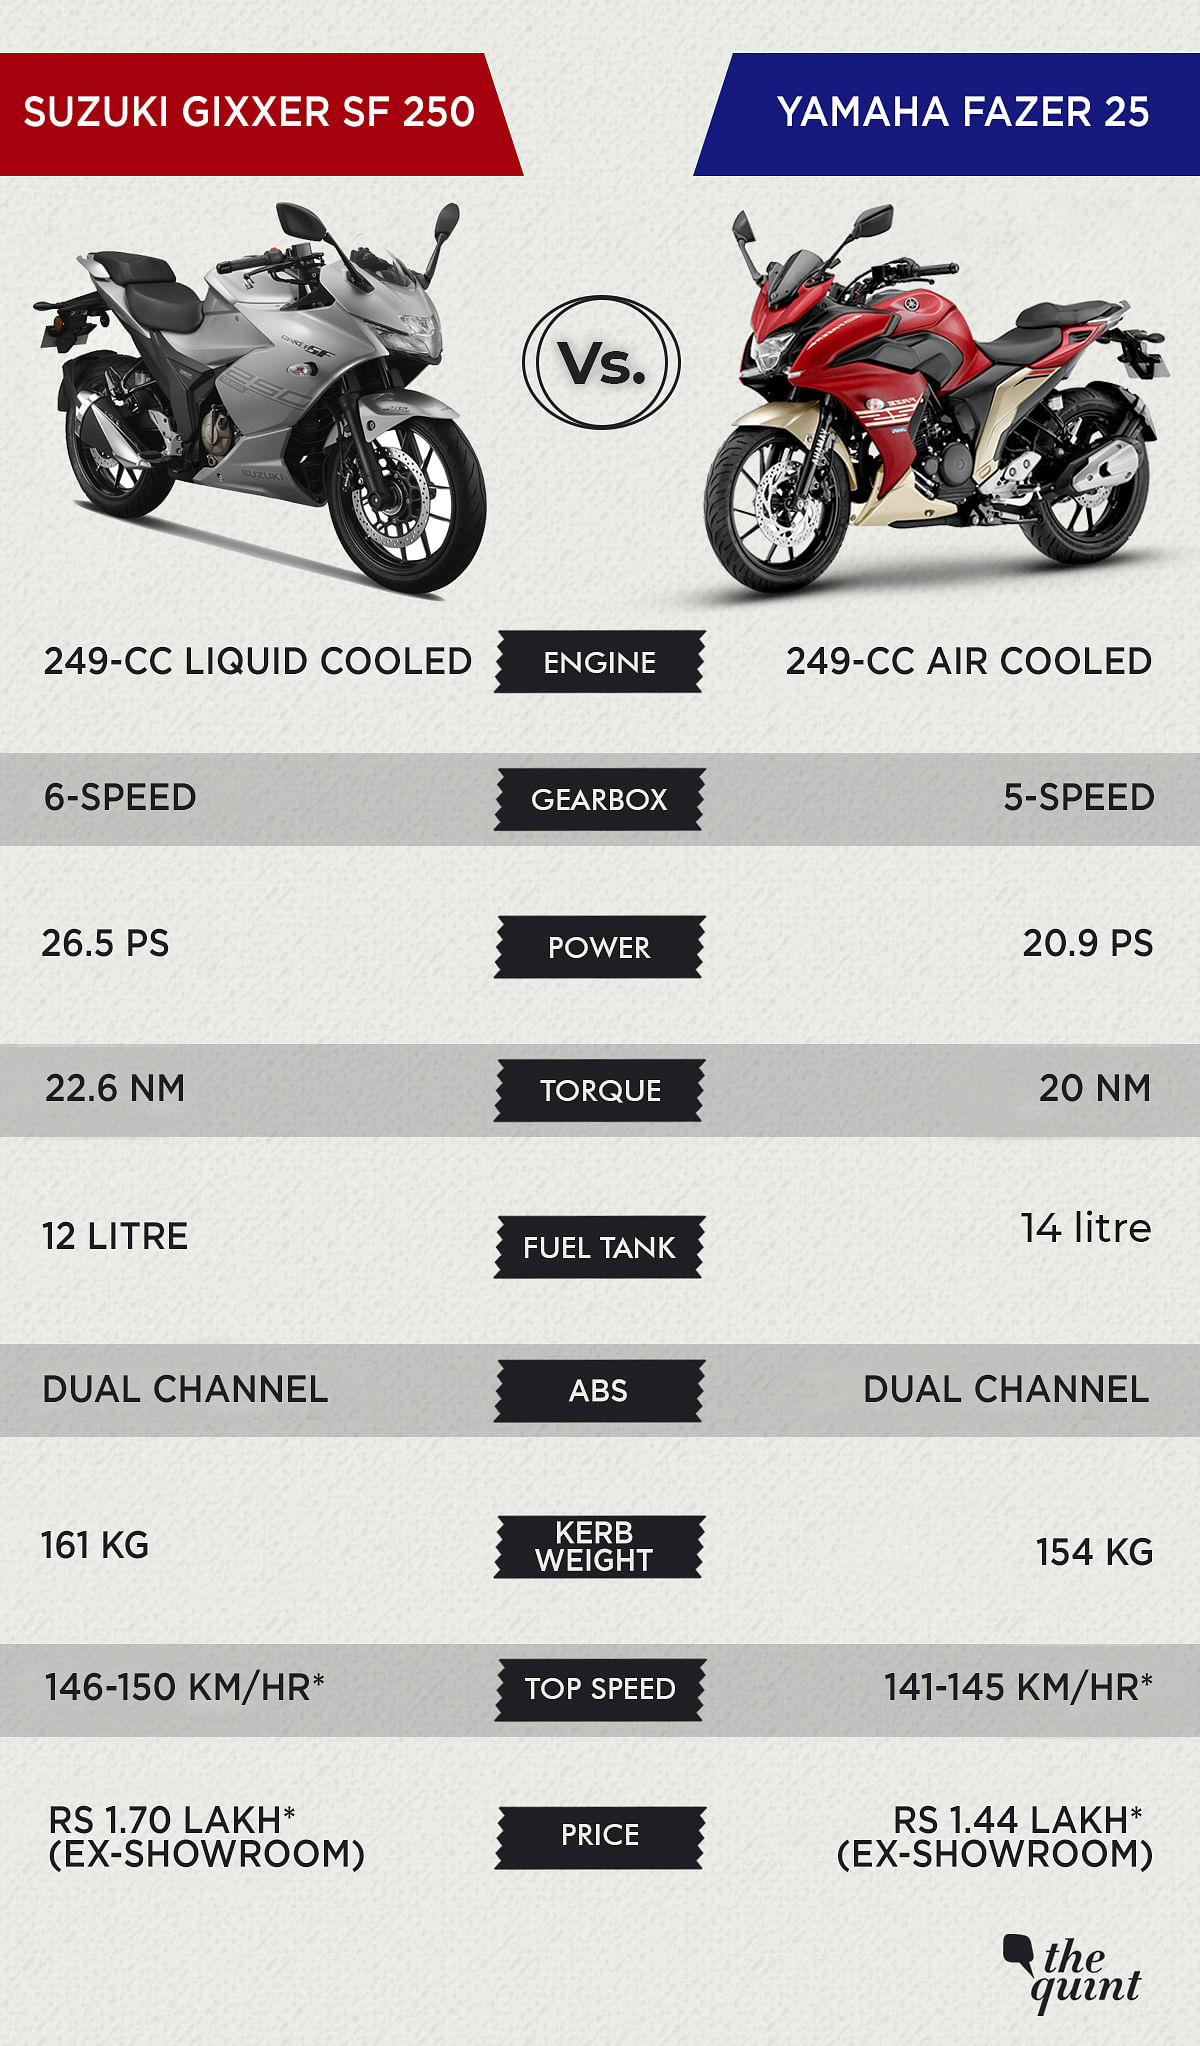 Here’s a comparison between two 250cc motorcycles in the Indian market. Suzuki Gixxer SF 250 versus Yamaha Fazer 25.